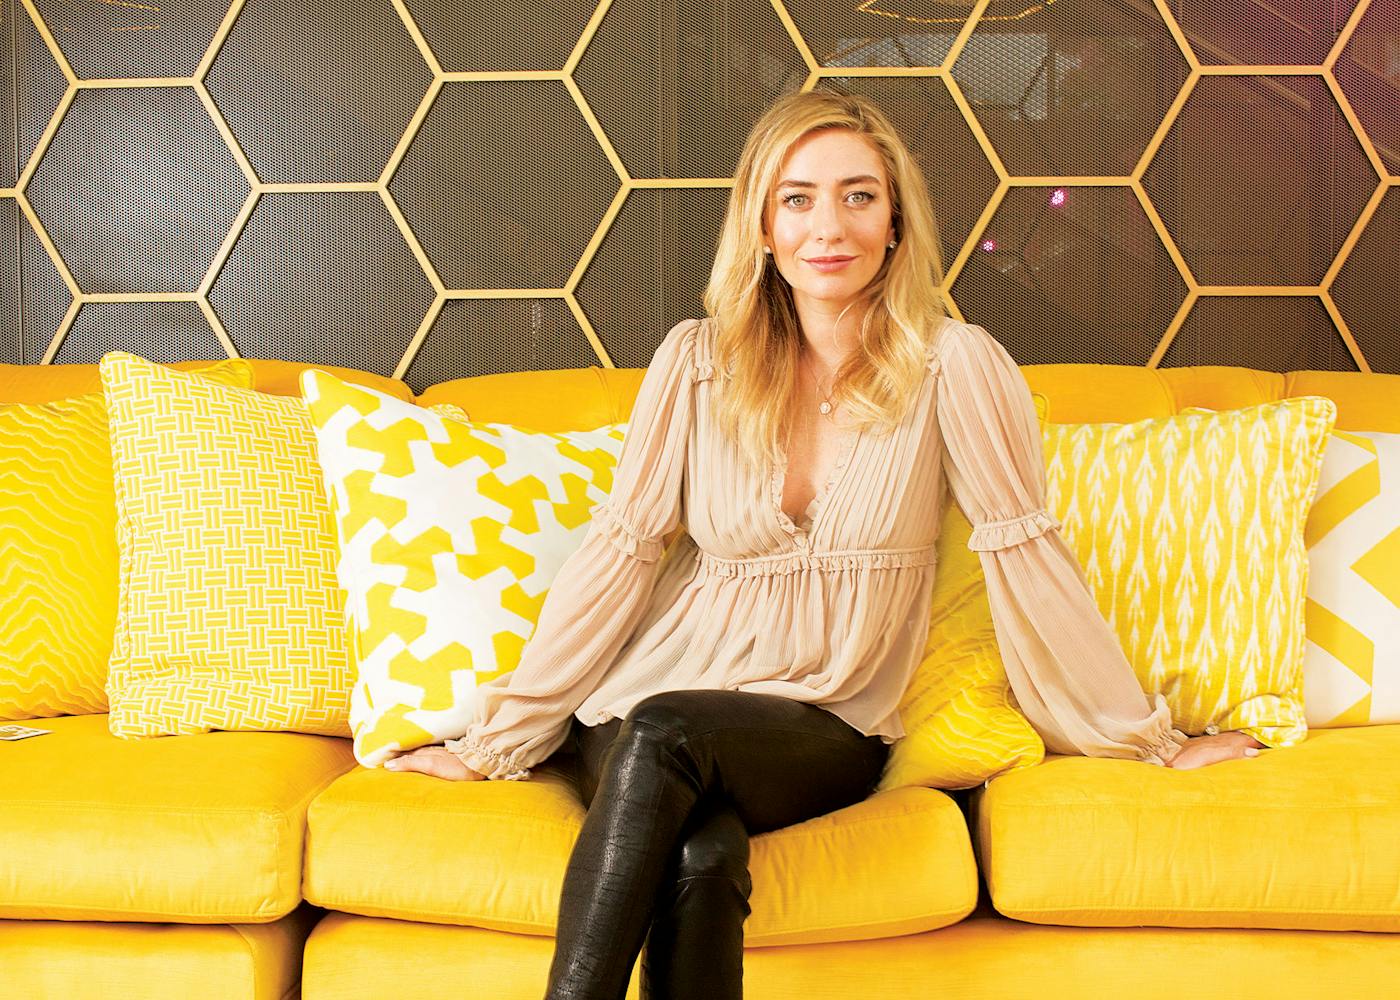 Force Fucks With Noty Amerika Mom - How Whitney Wolfe Herd Changed the Dating Game â€“ Texas Monthly